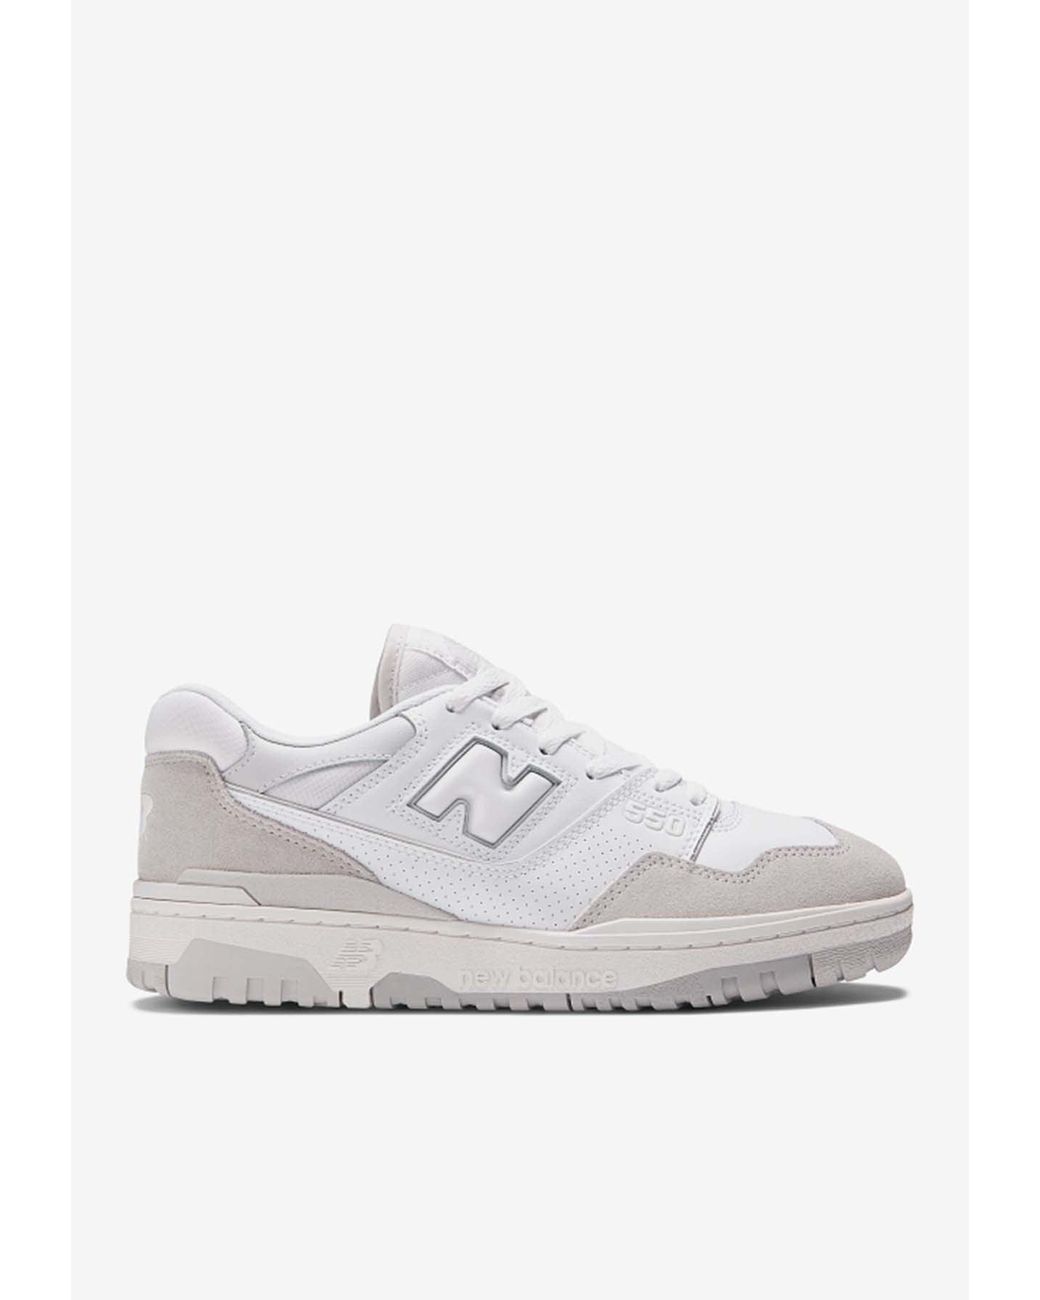 New Balance 550 Low-top Sneakers In White With Summer Fog And Rain ...